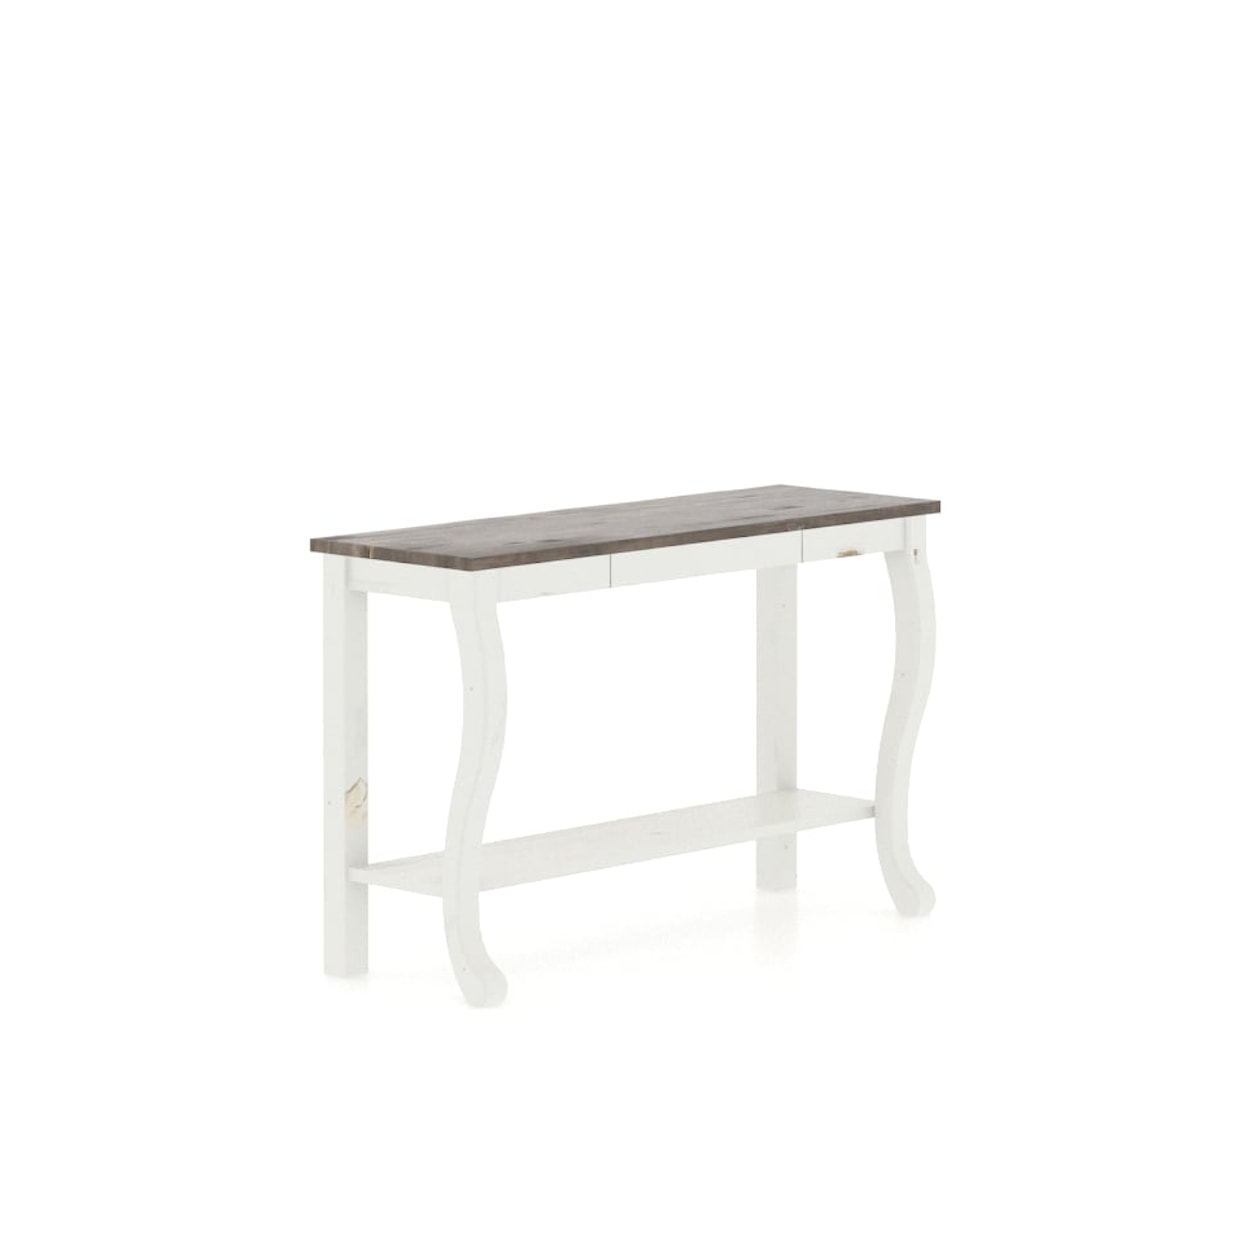 Canadel Canadel Living CONSOLE TABLE 1648